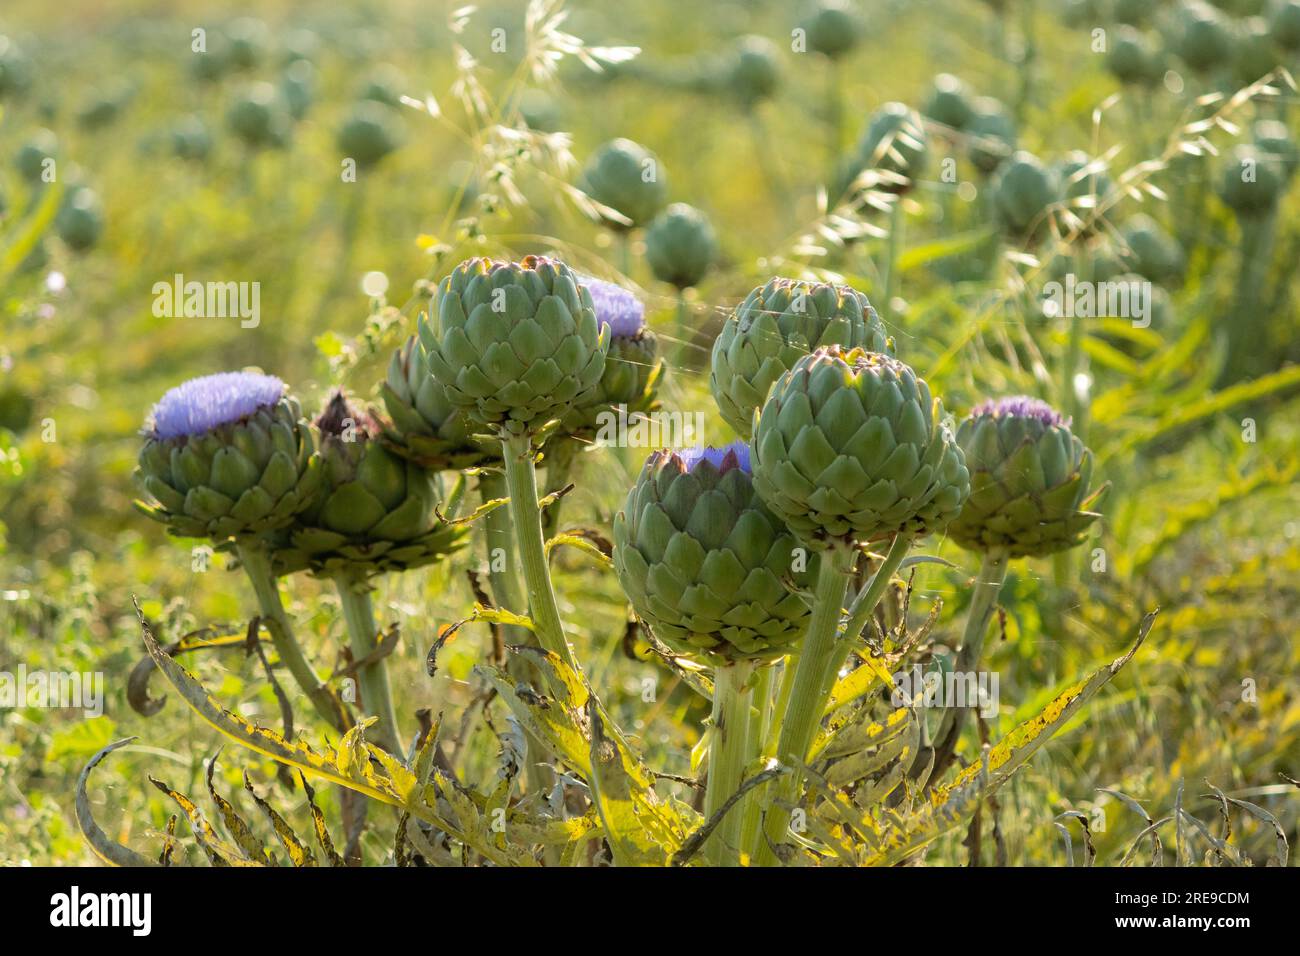 Fresh artichokes with cluster of budding flower buds growing in agriculture field under daylight on sunny day against blurred countryside Stock Photo